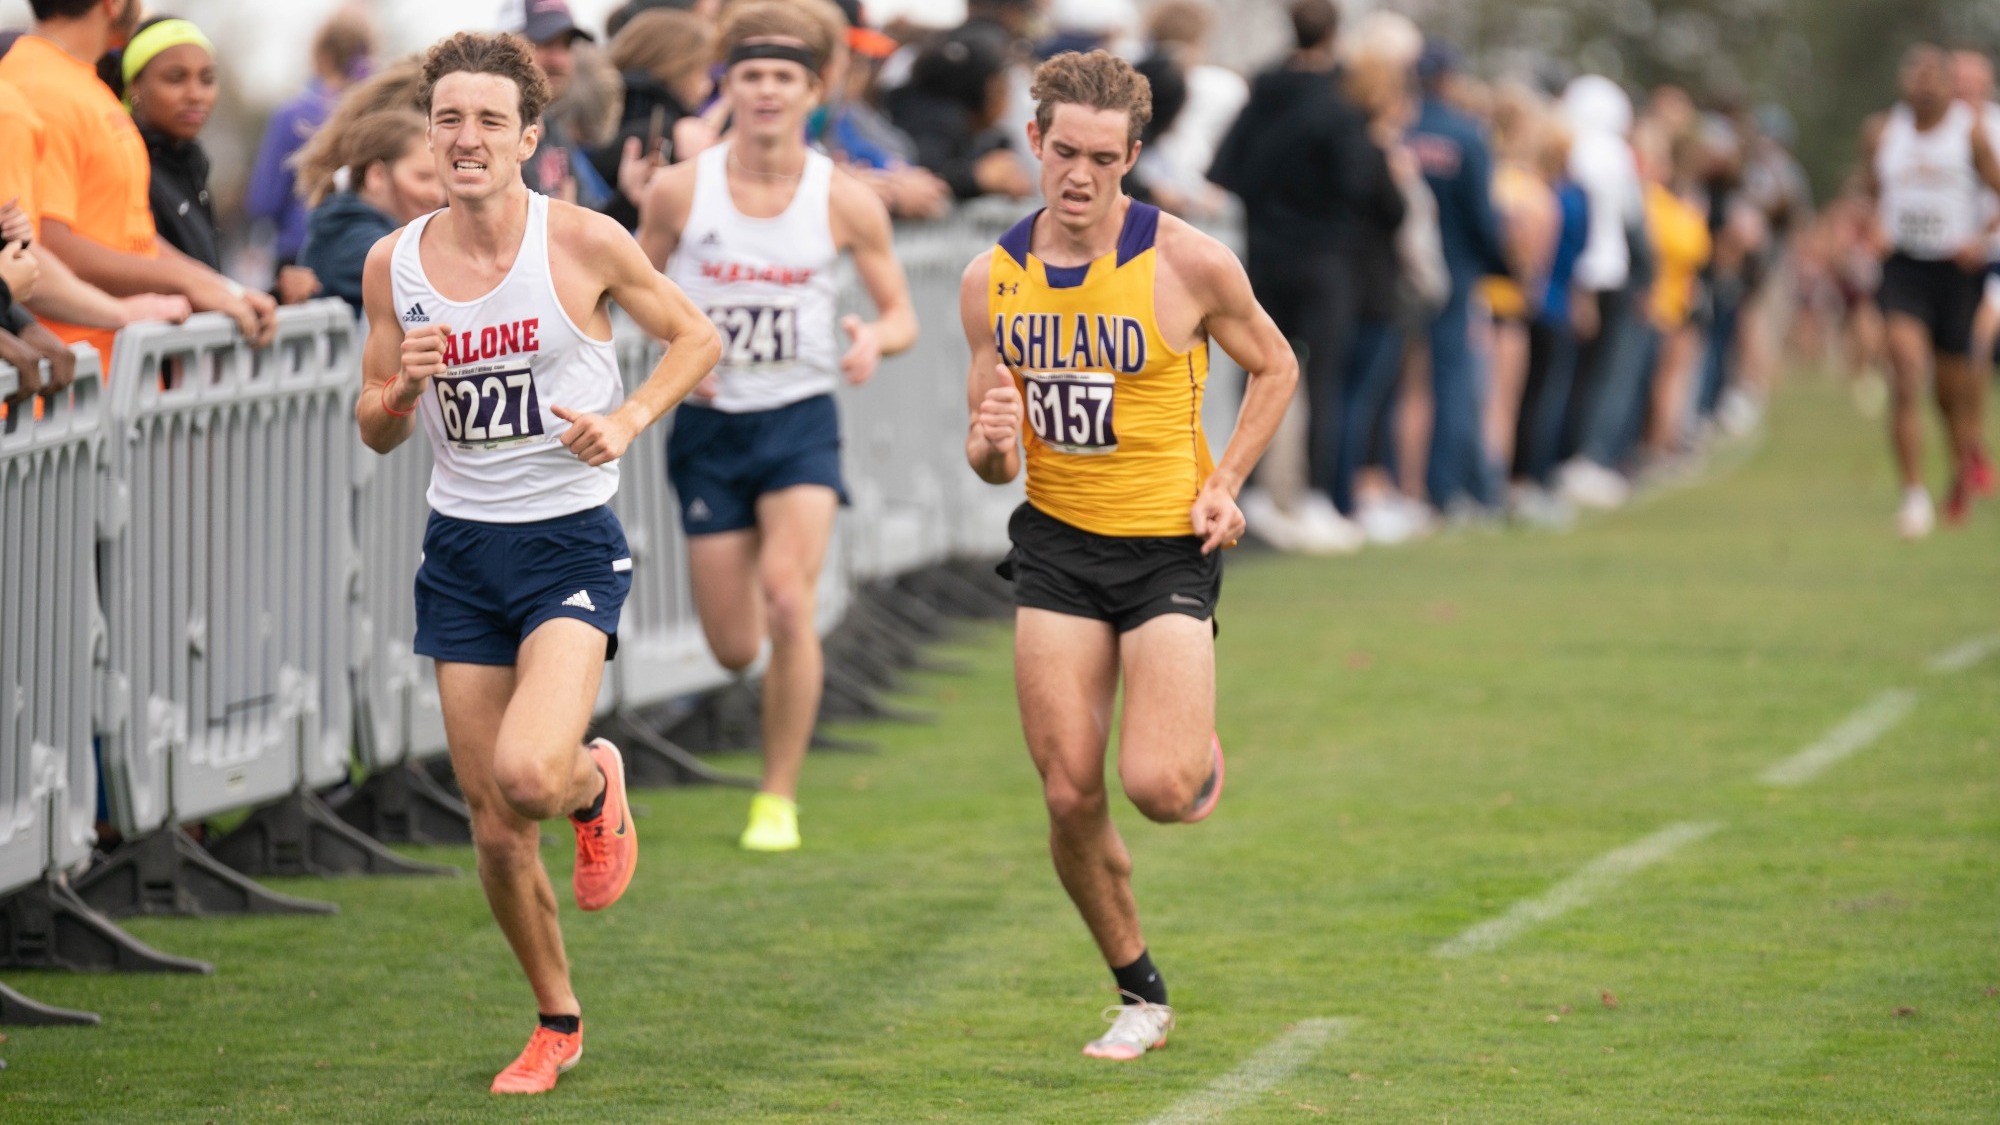 Michael Snopik Leads the Way for Eagle Cross Country at GMAC